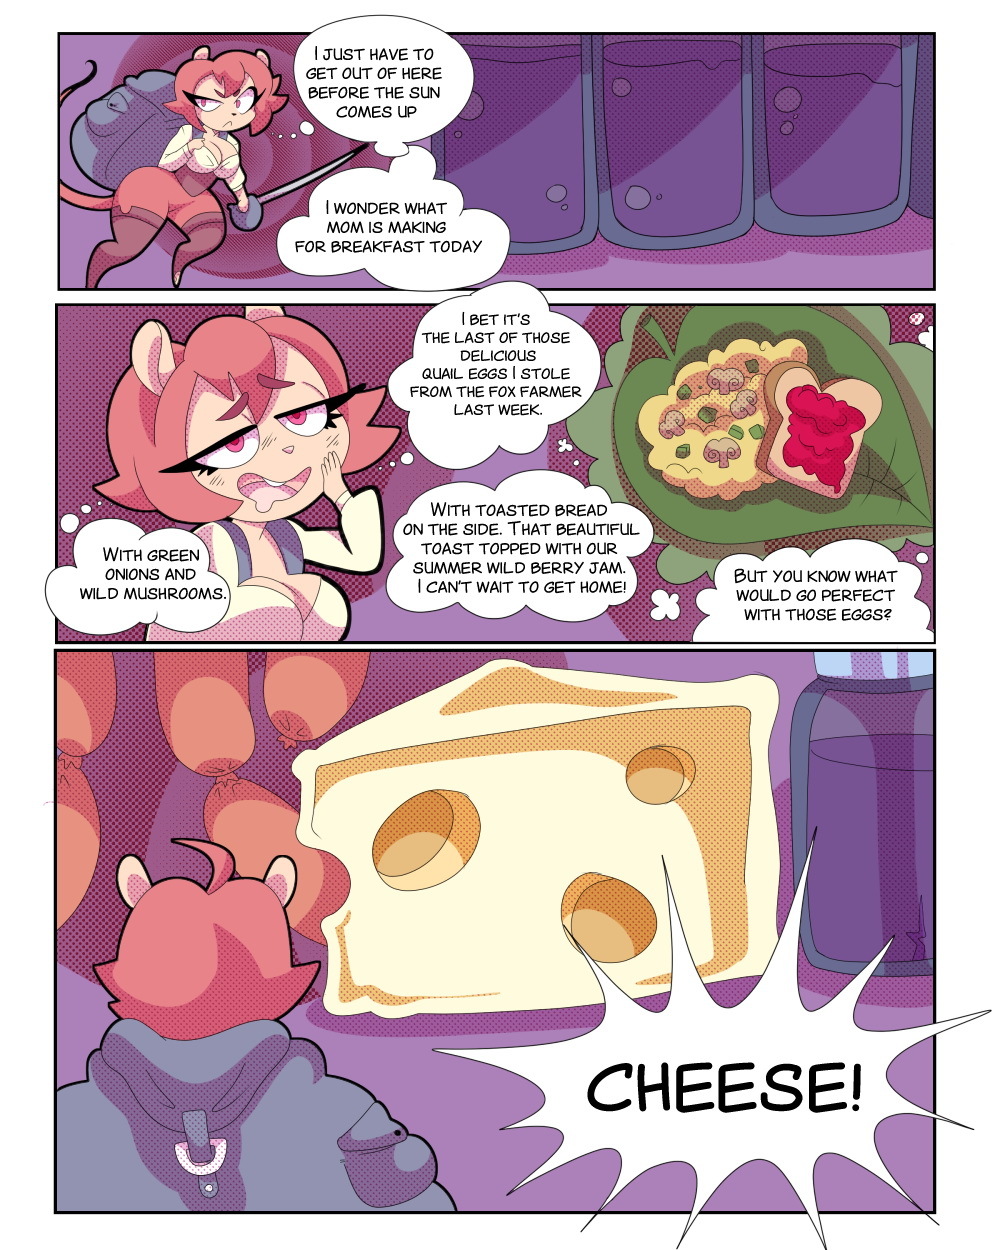 Sophie and Orion: The Treacherous Pantry - Page 2